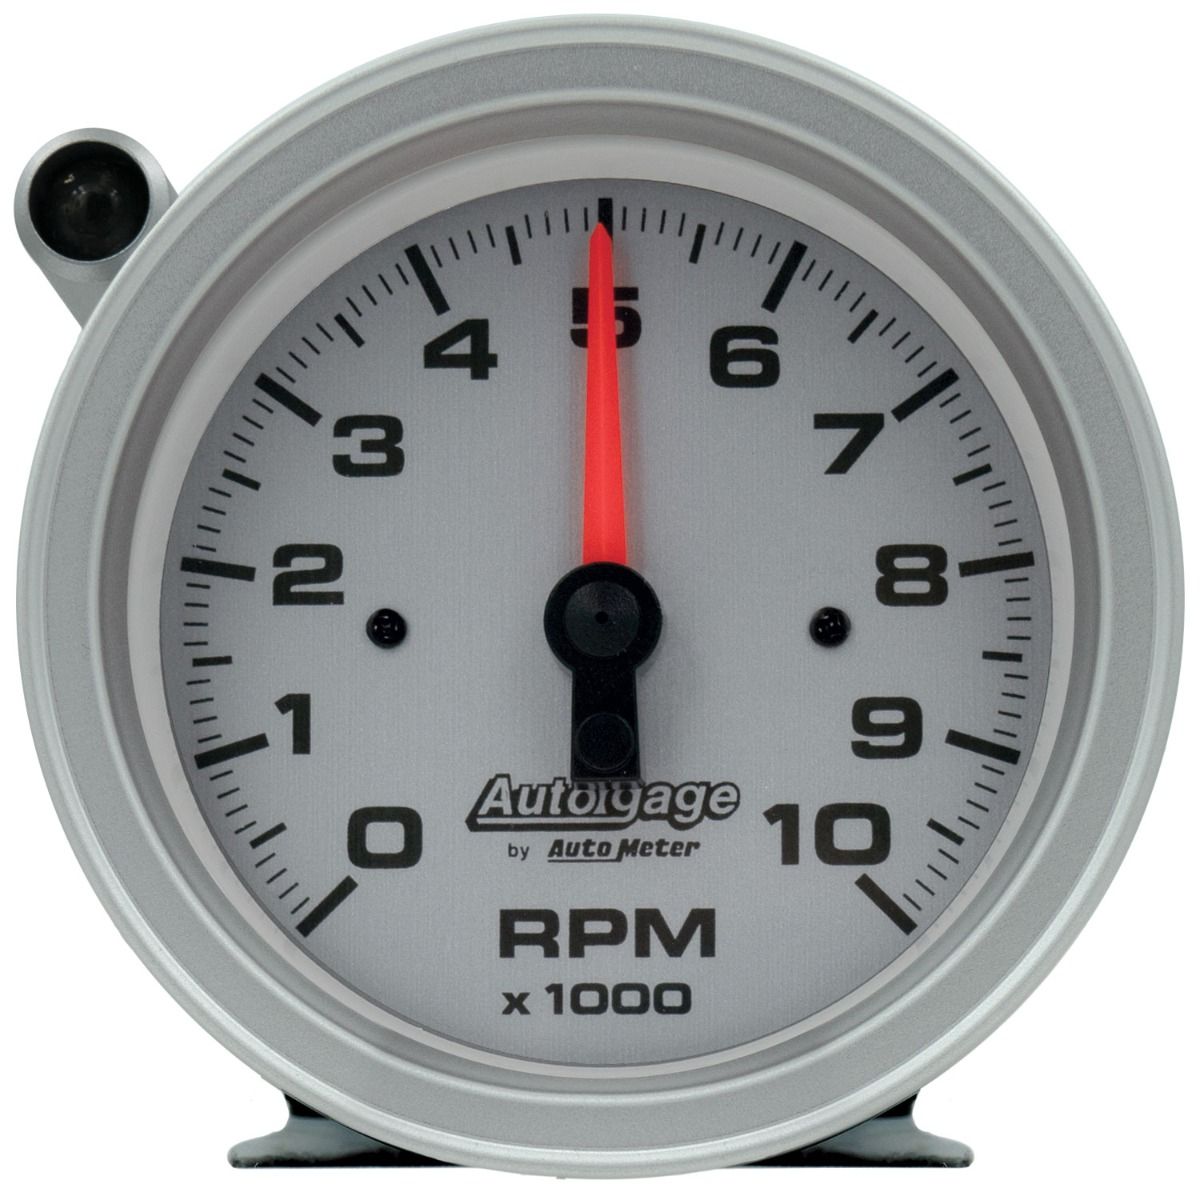 AutoMeter Tachometer Gauge 10K RPM 3 3/4in Pedestal w/Ext. Shift-Light - Silver Dial/Black Case - Dirty Racing Products